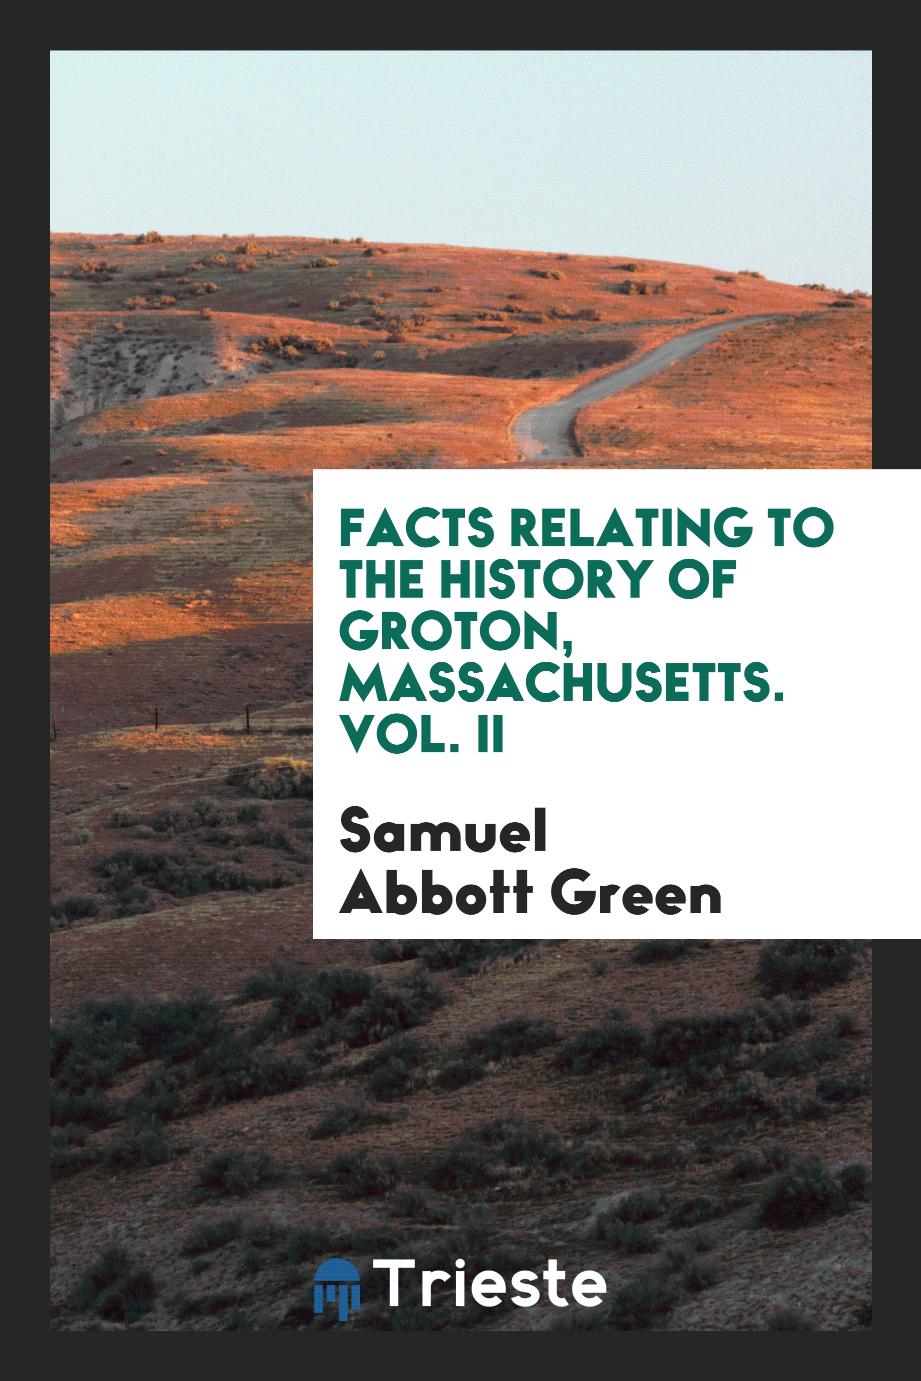 Facts relating to the history of Groton, Massachusetts. Vol. II